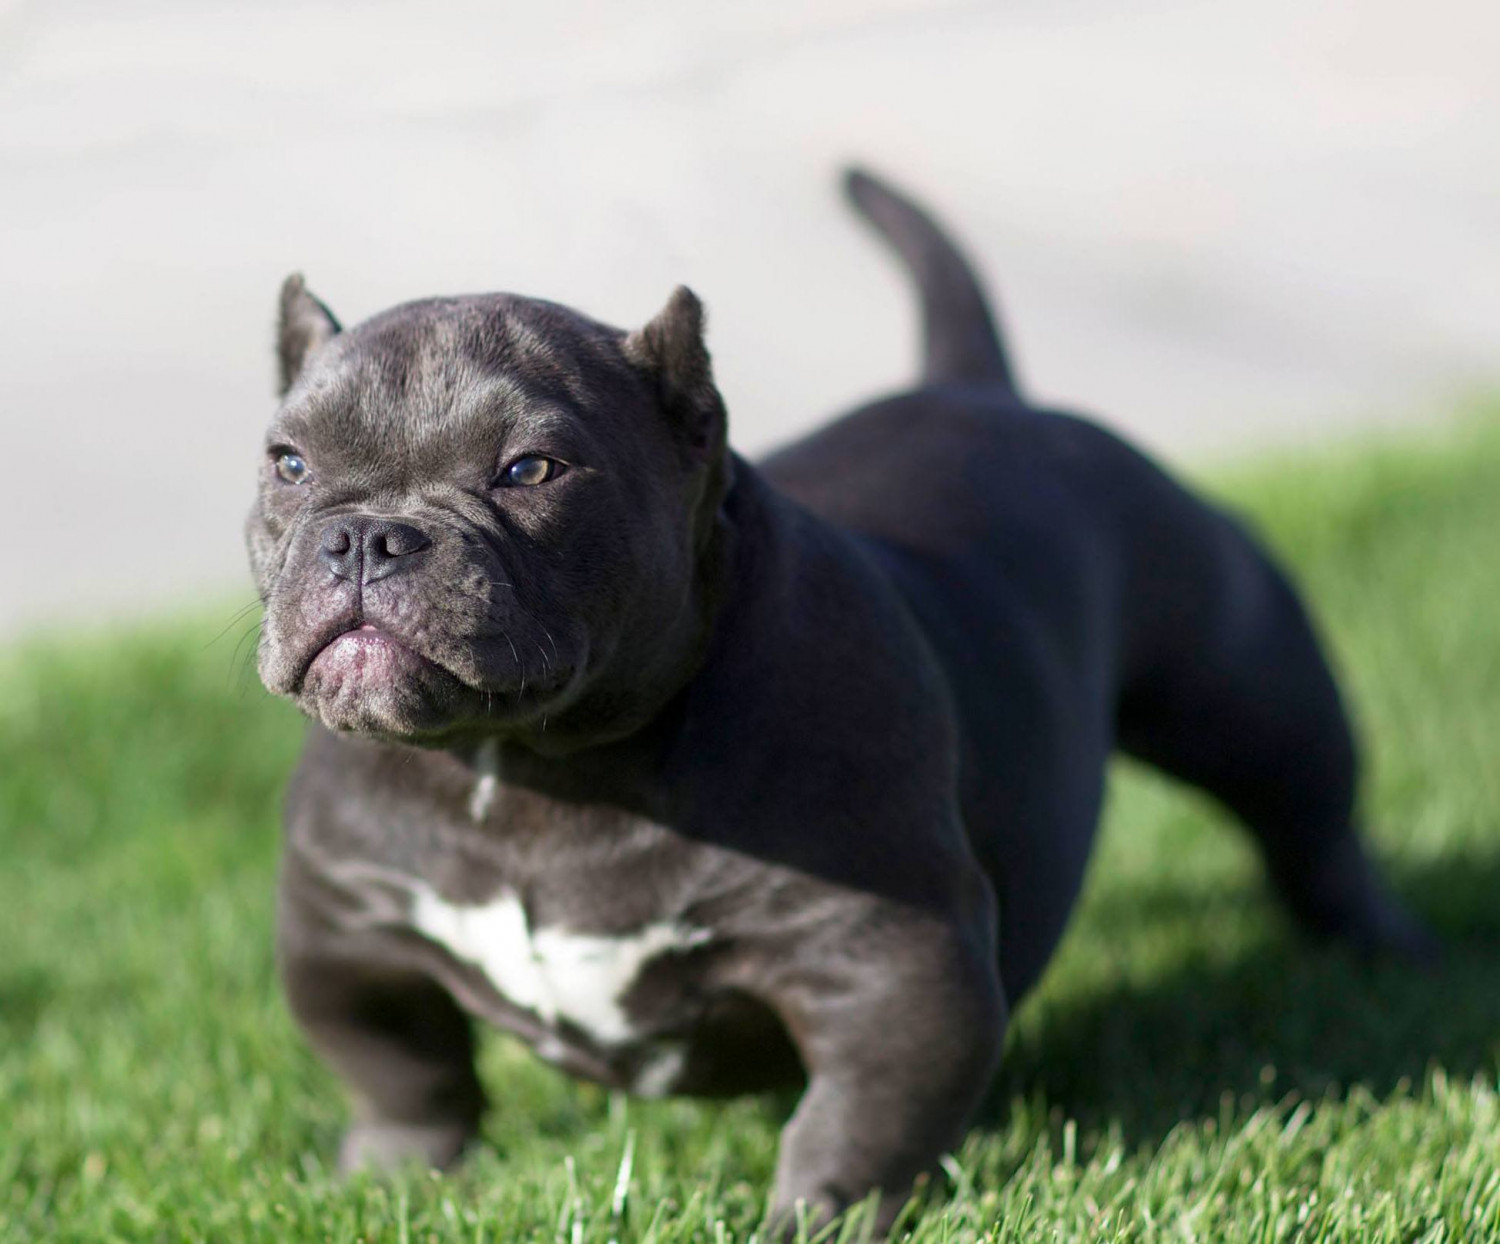 American Bully Dog Breed Information, Images, Characteristics, Health